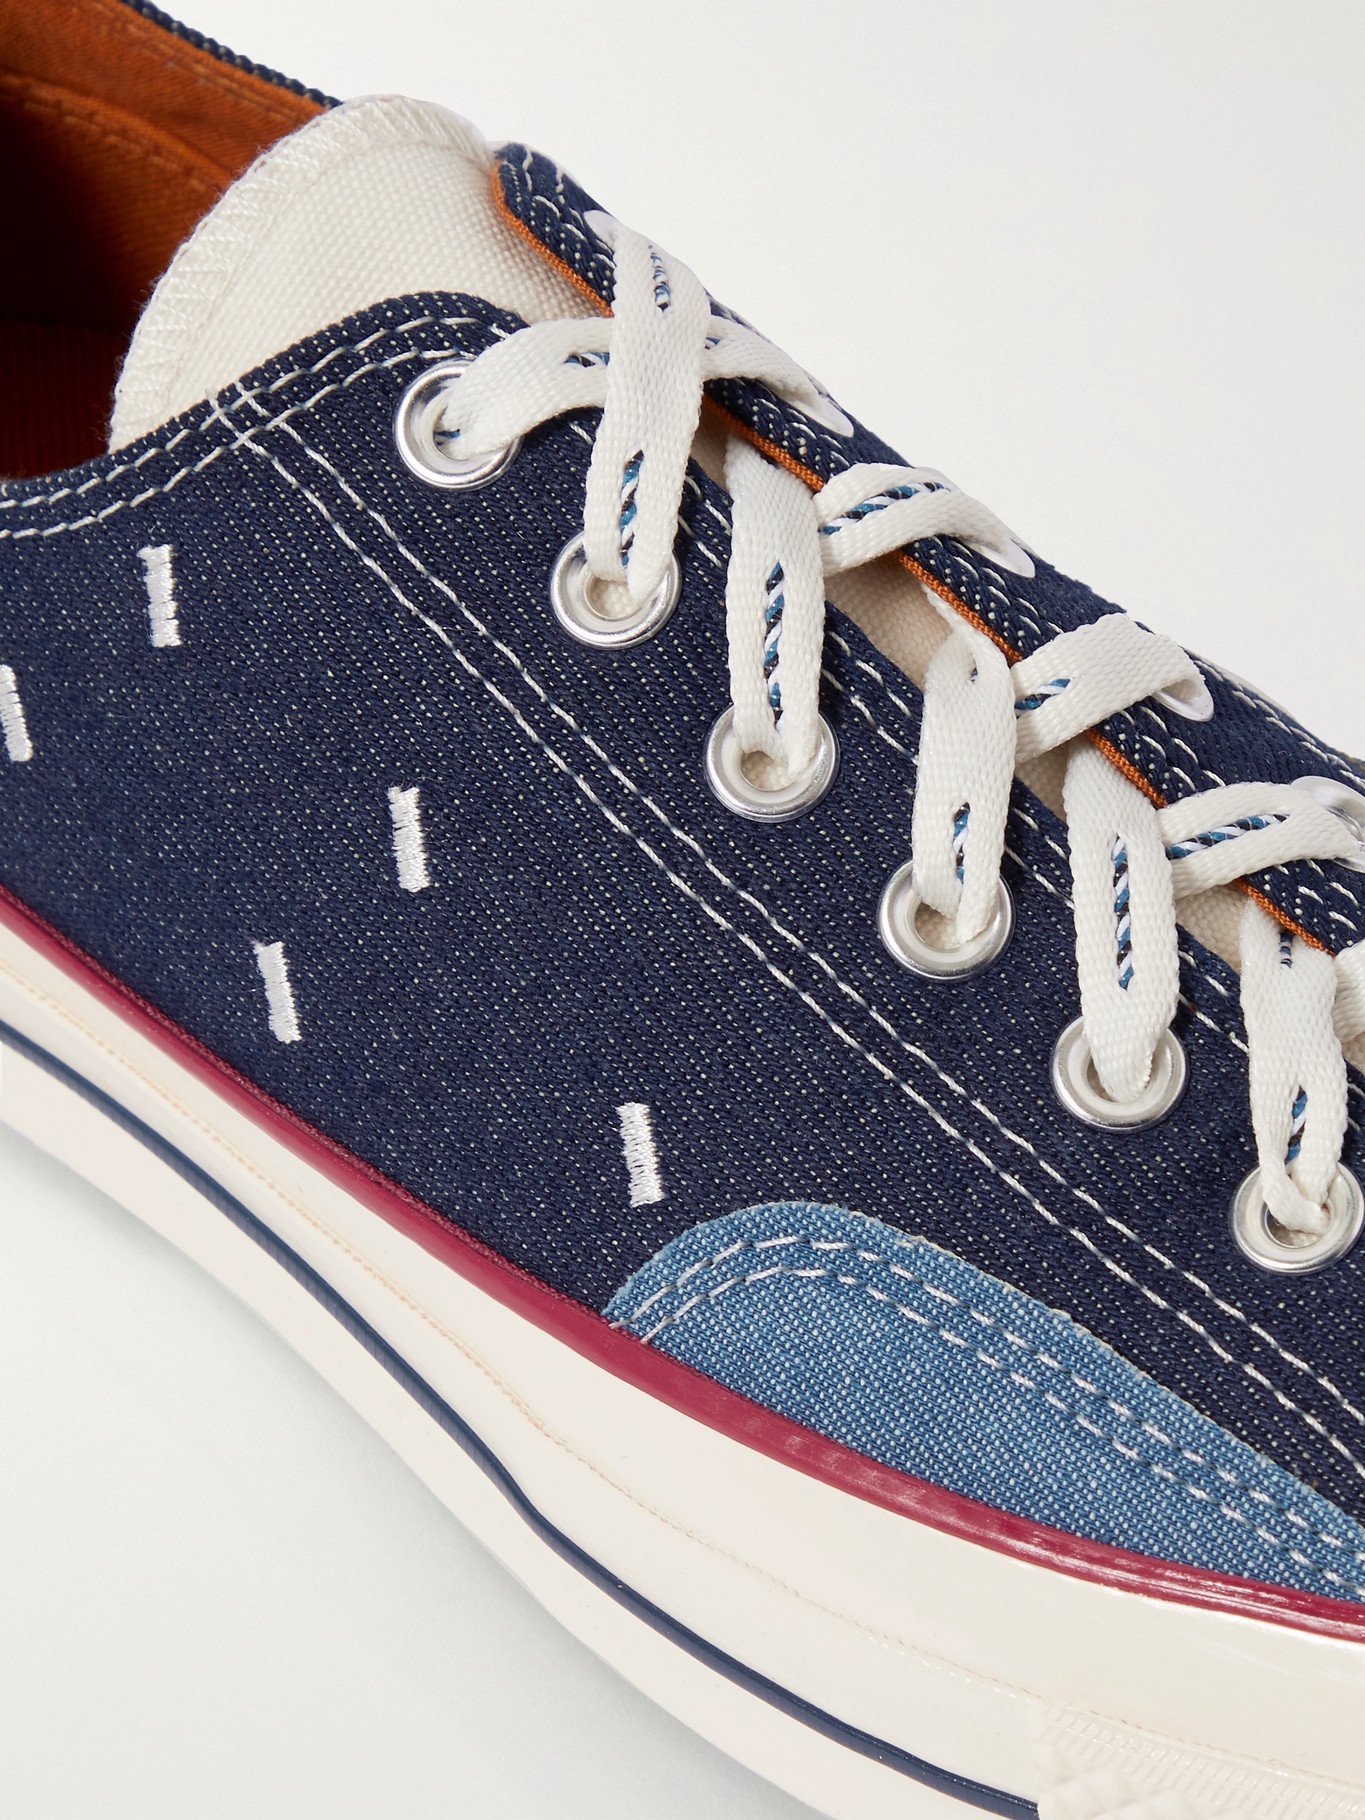 CONVERSE - Chuck 70 OX Embroidered Denim and Canvas Sneakers - Blue Converse